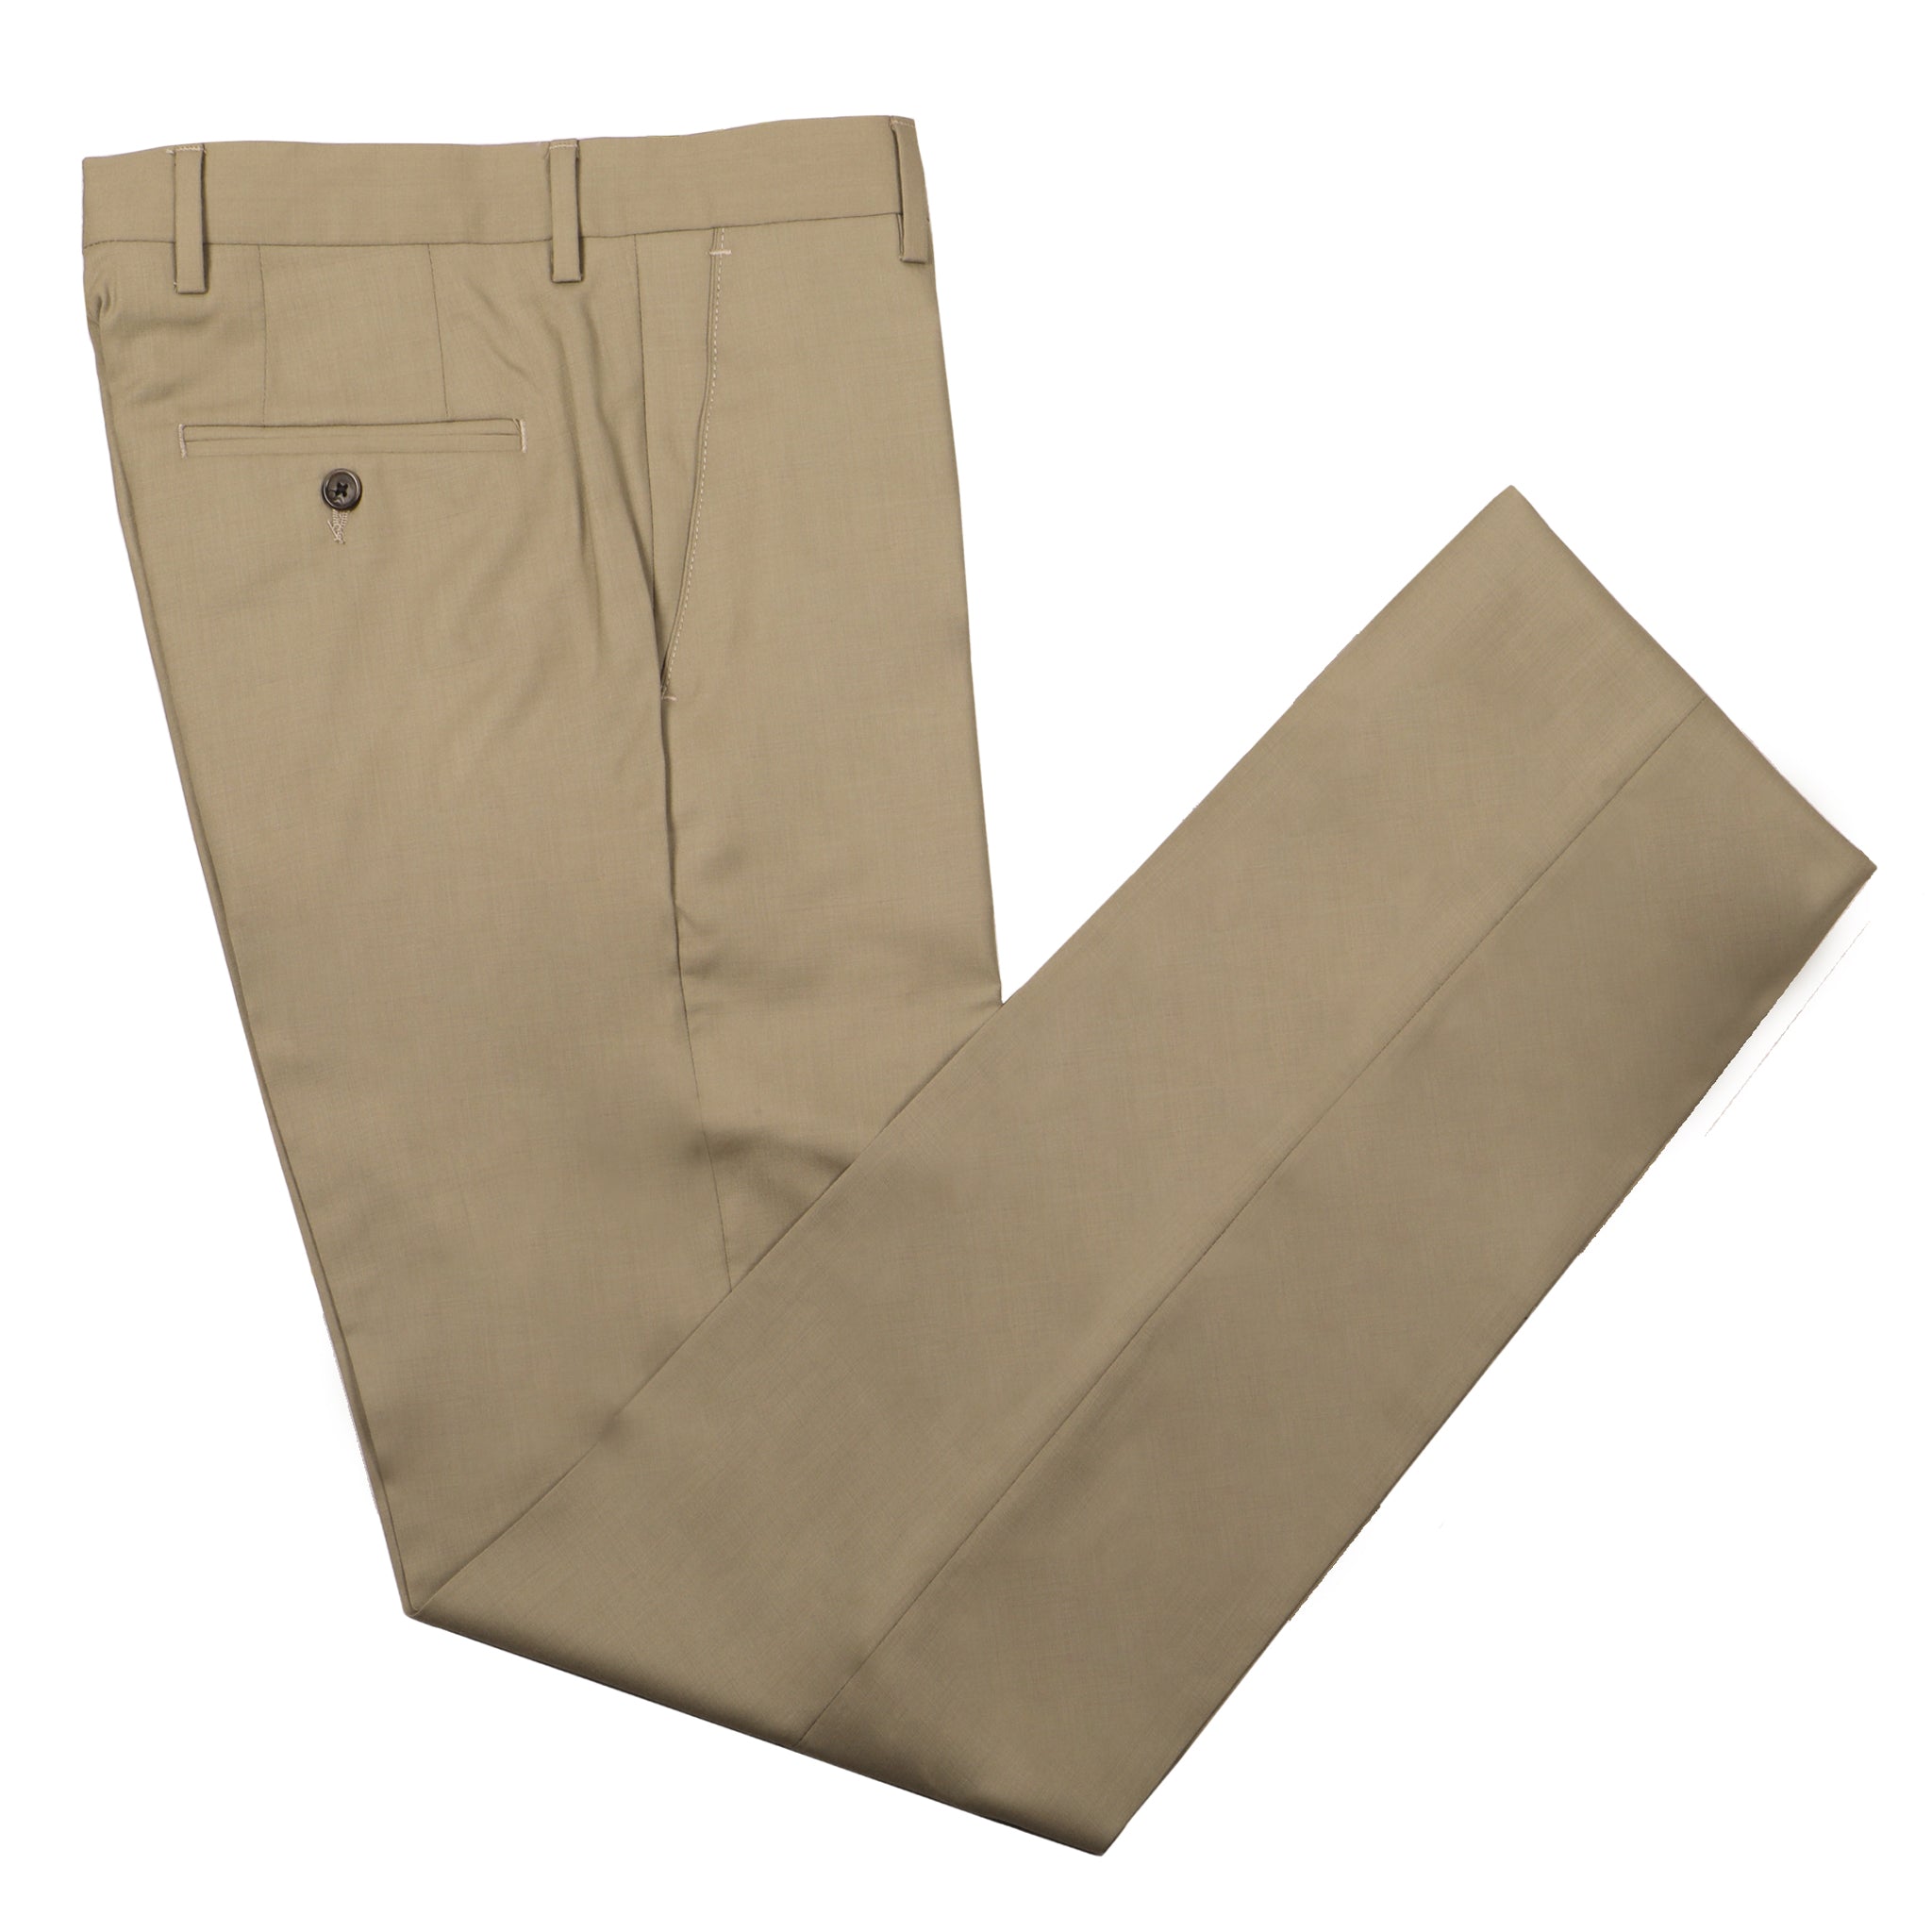 Discover more than 133 donegal trousers